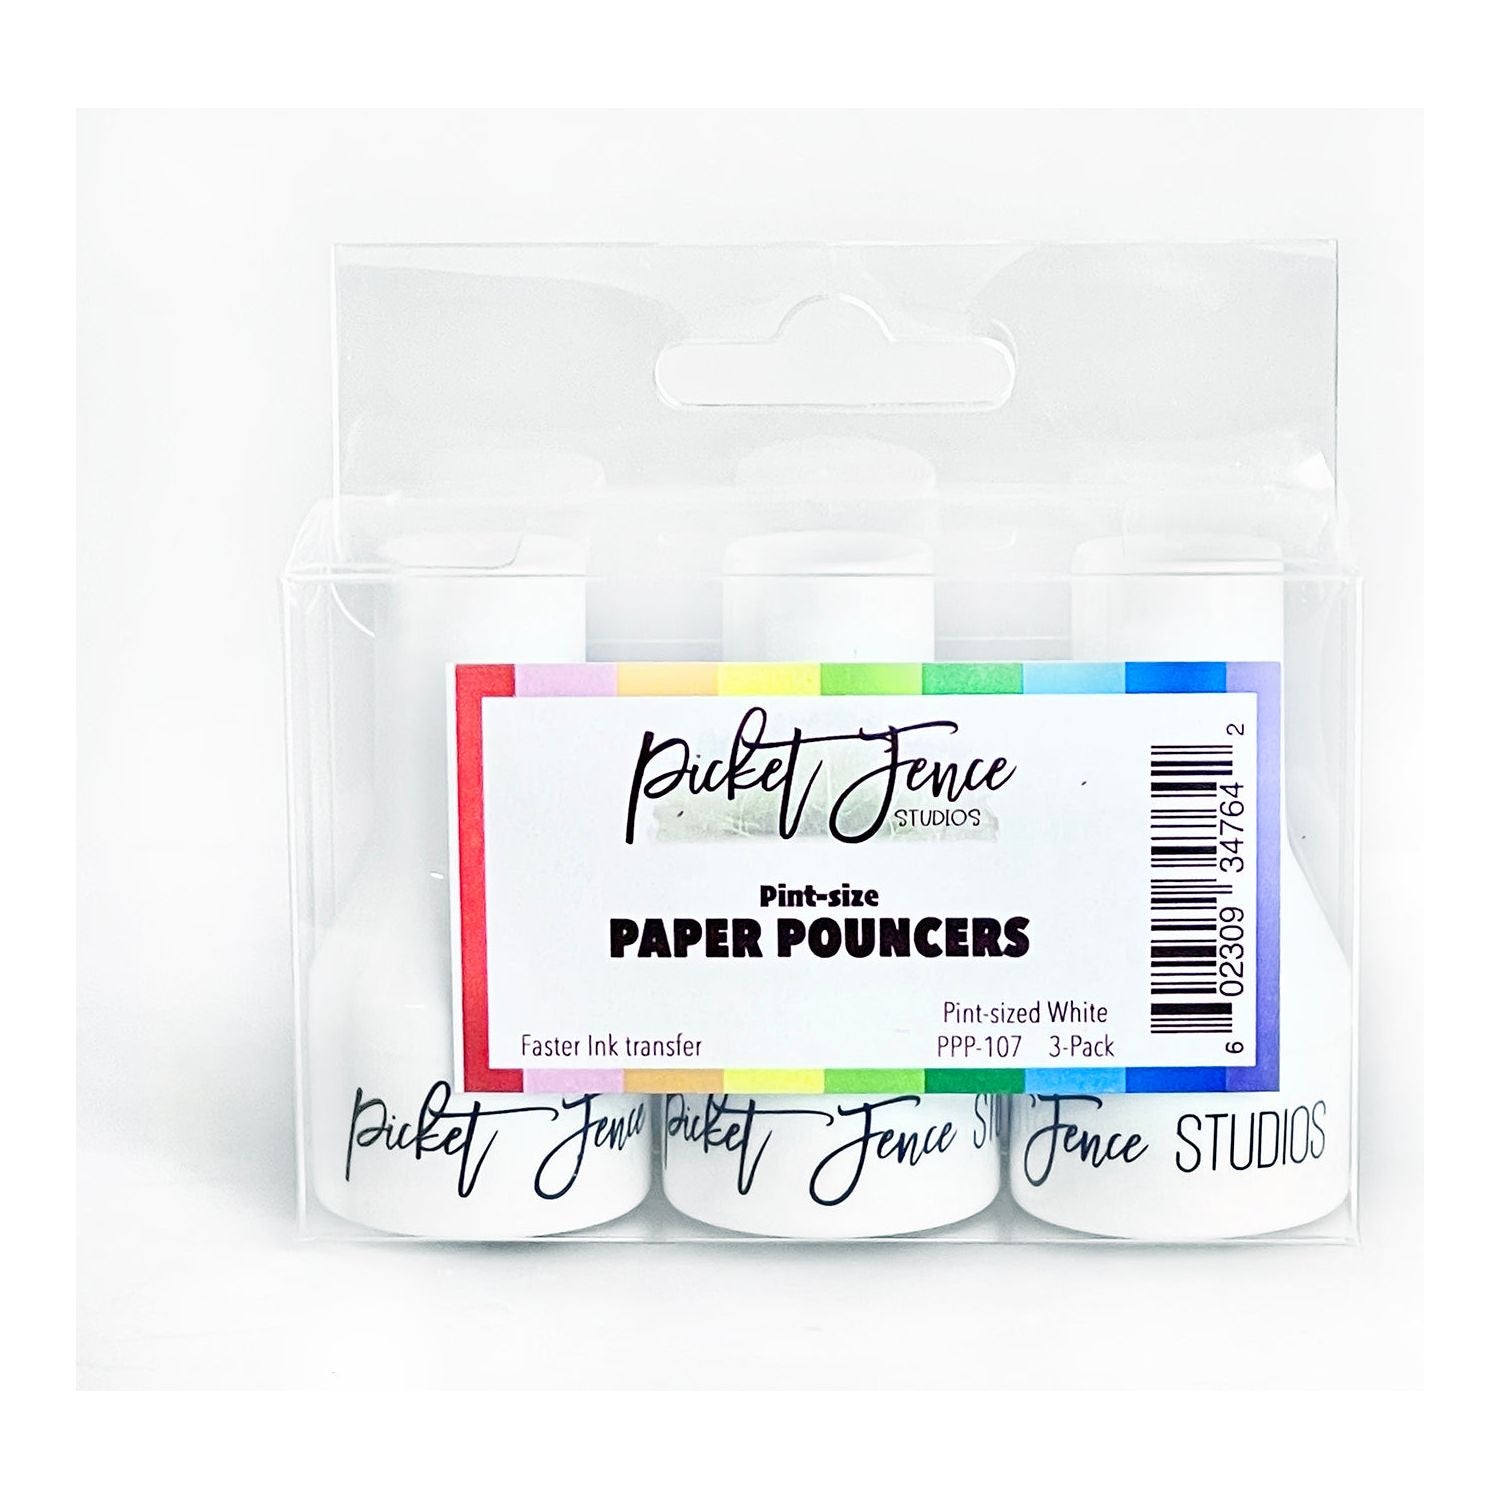 BUY ALL: DOUBLE ORDER of White Pint-sized Paper Pouncers